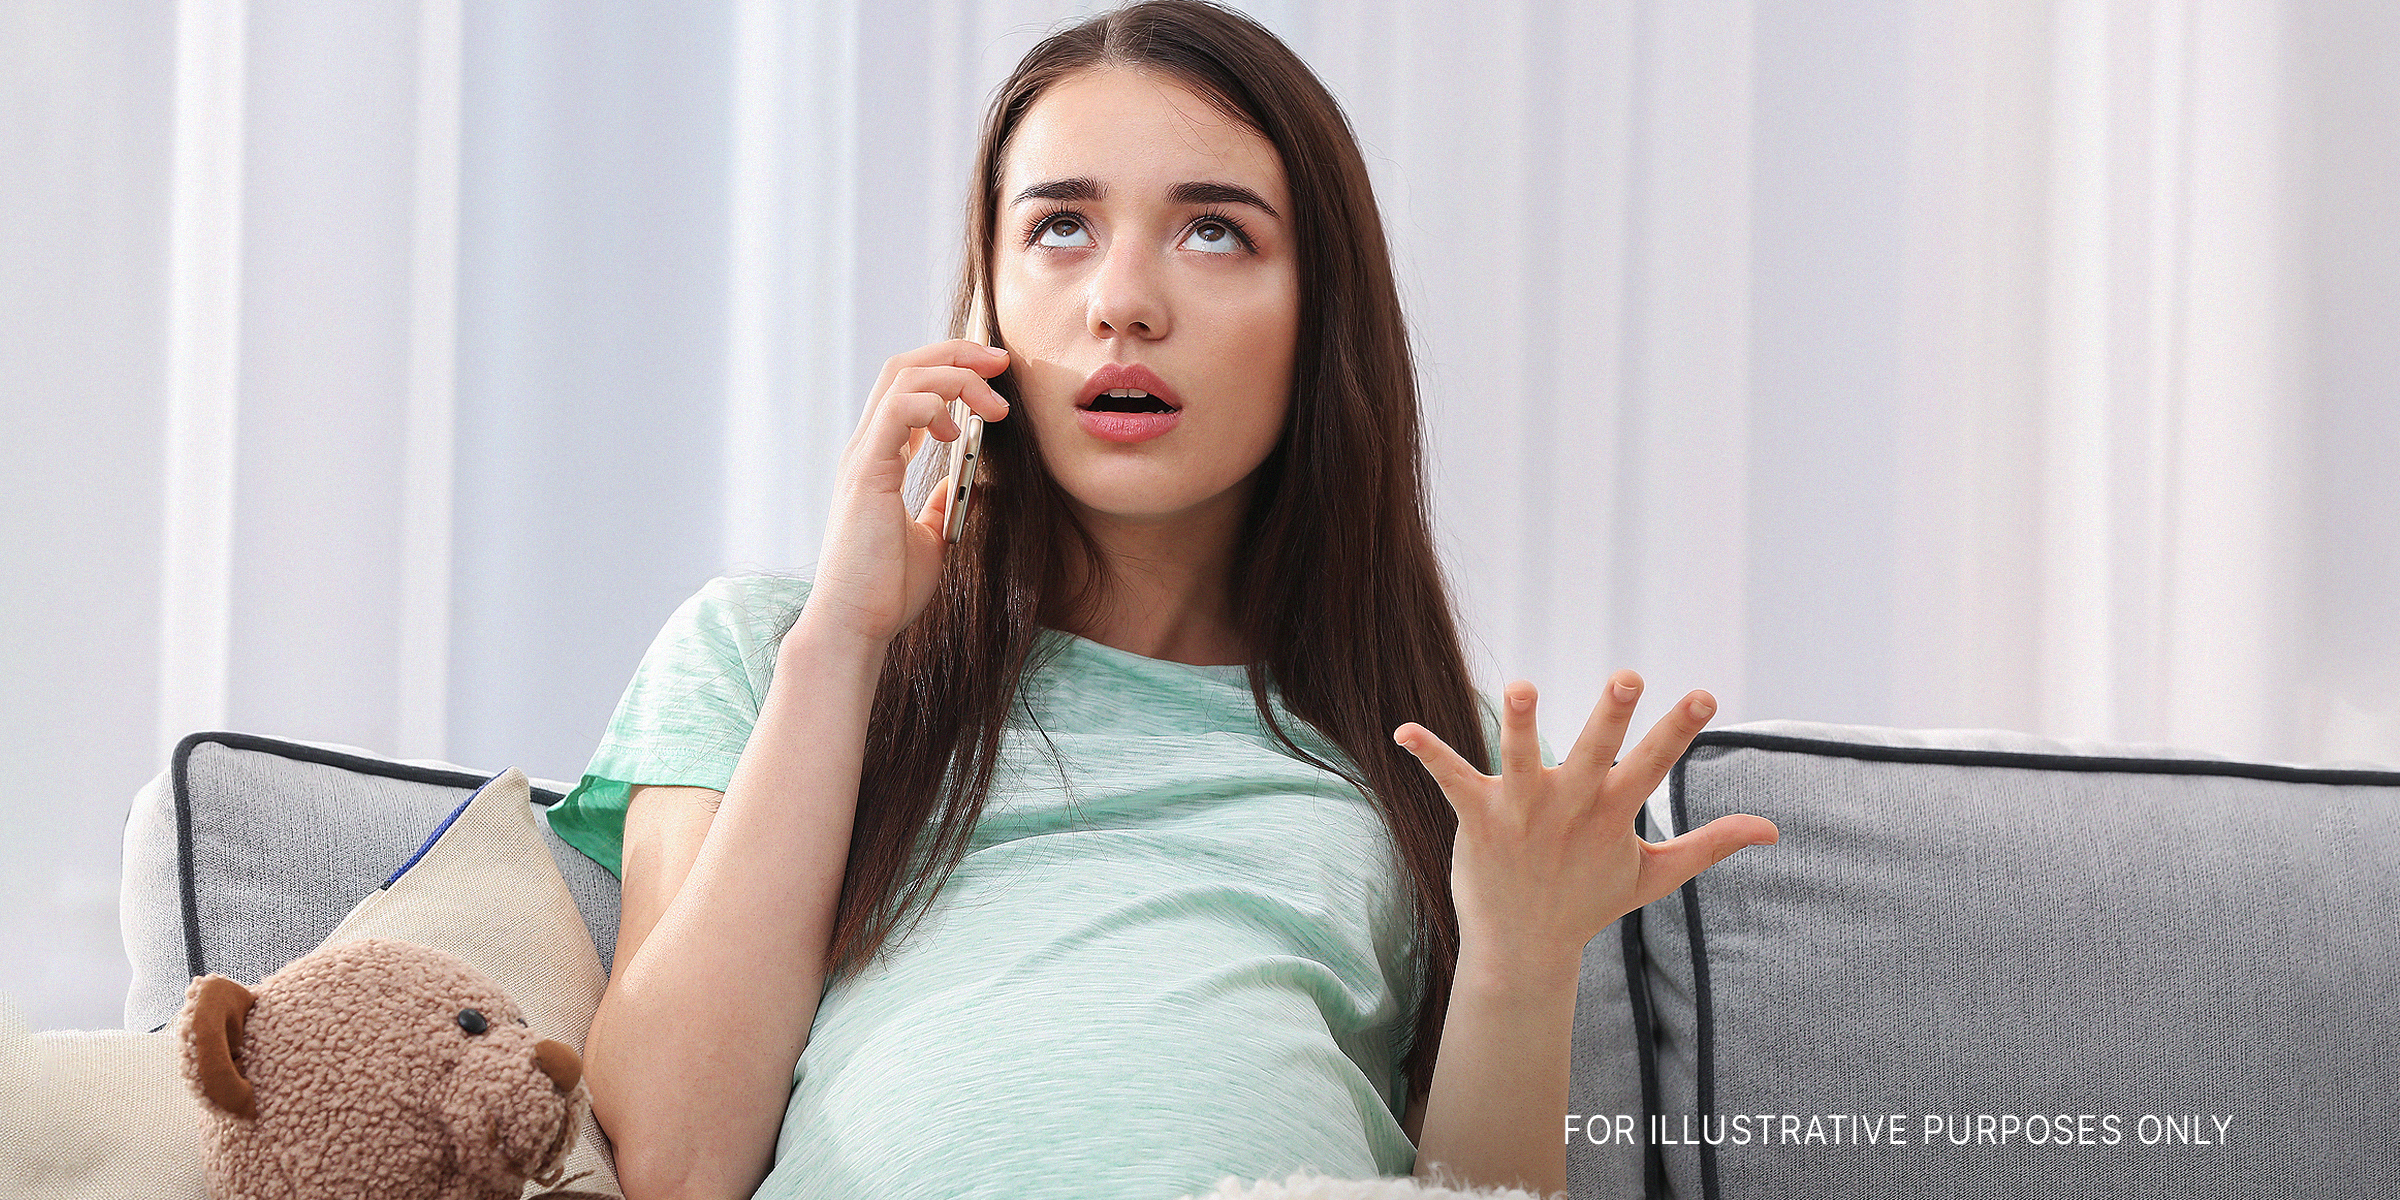 A pregnant woman looking annoyed while on the phone | Source: Shutterstock